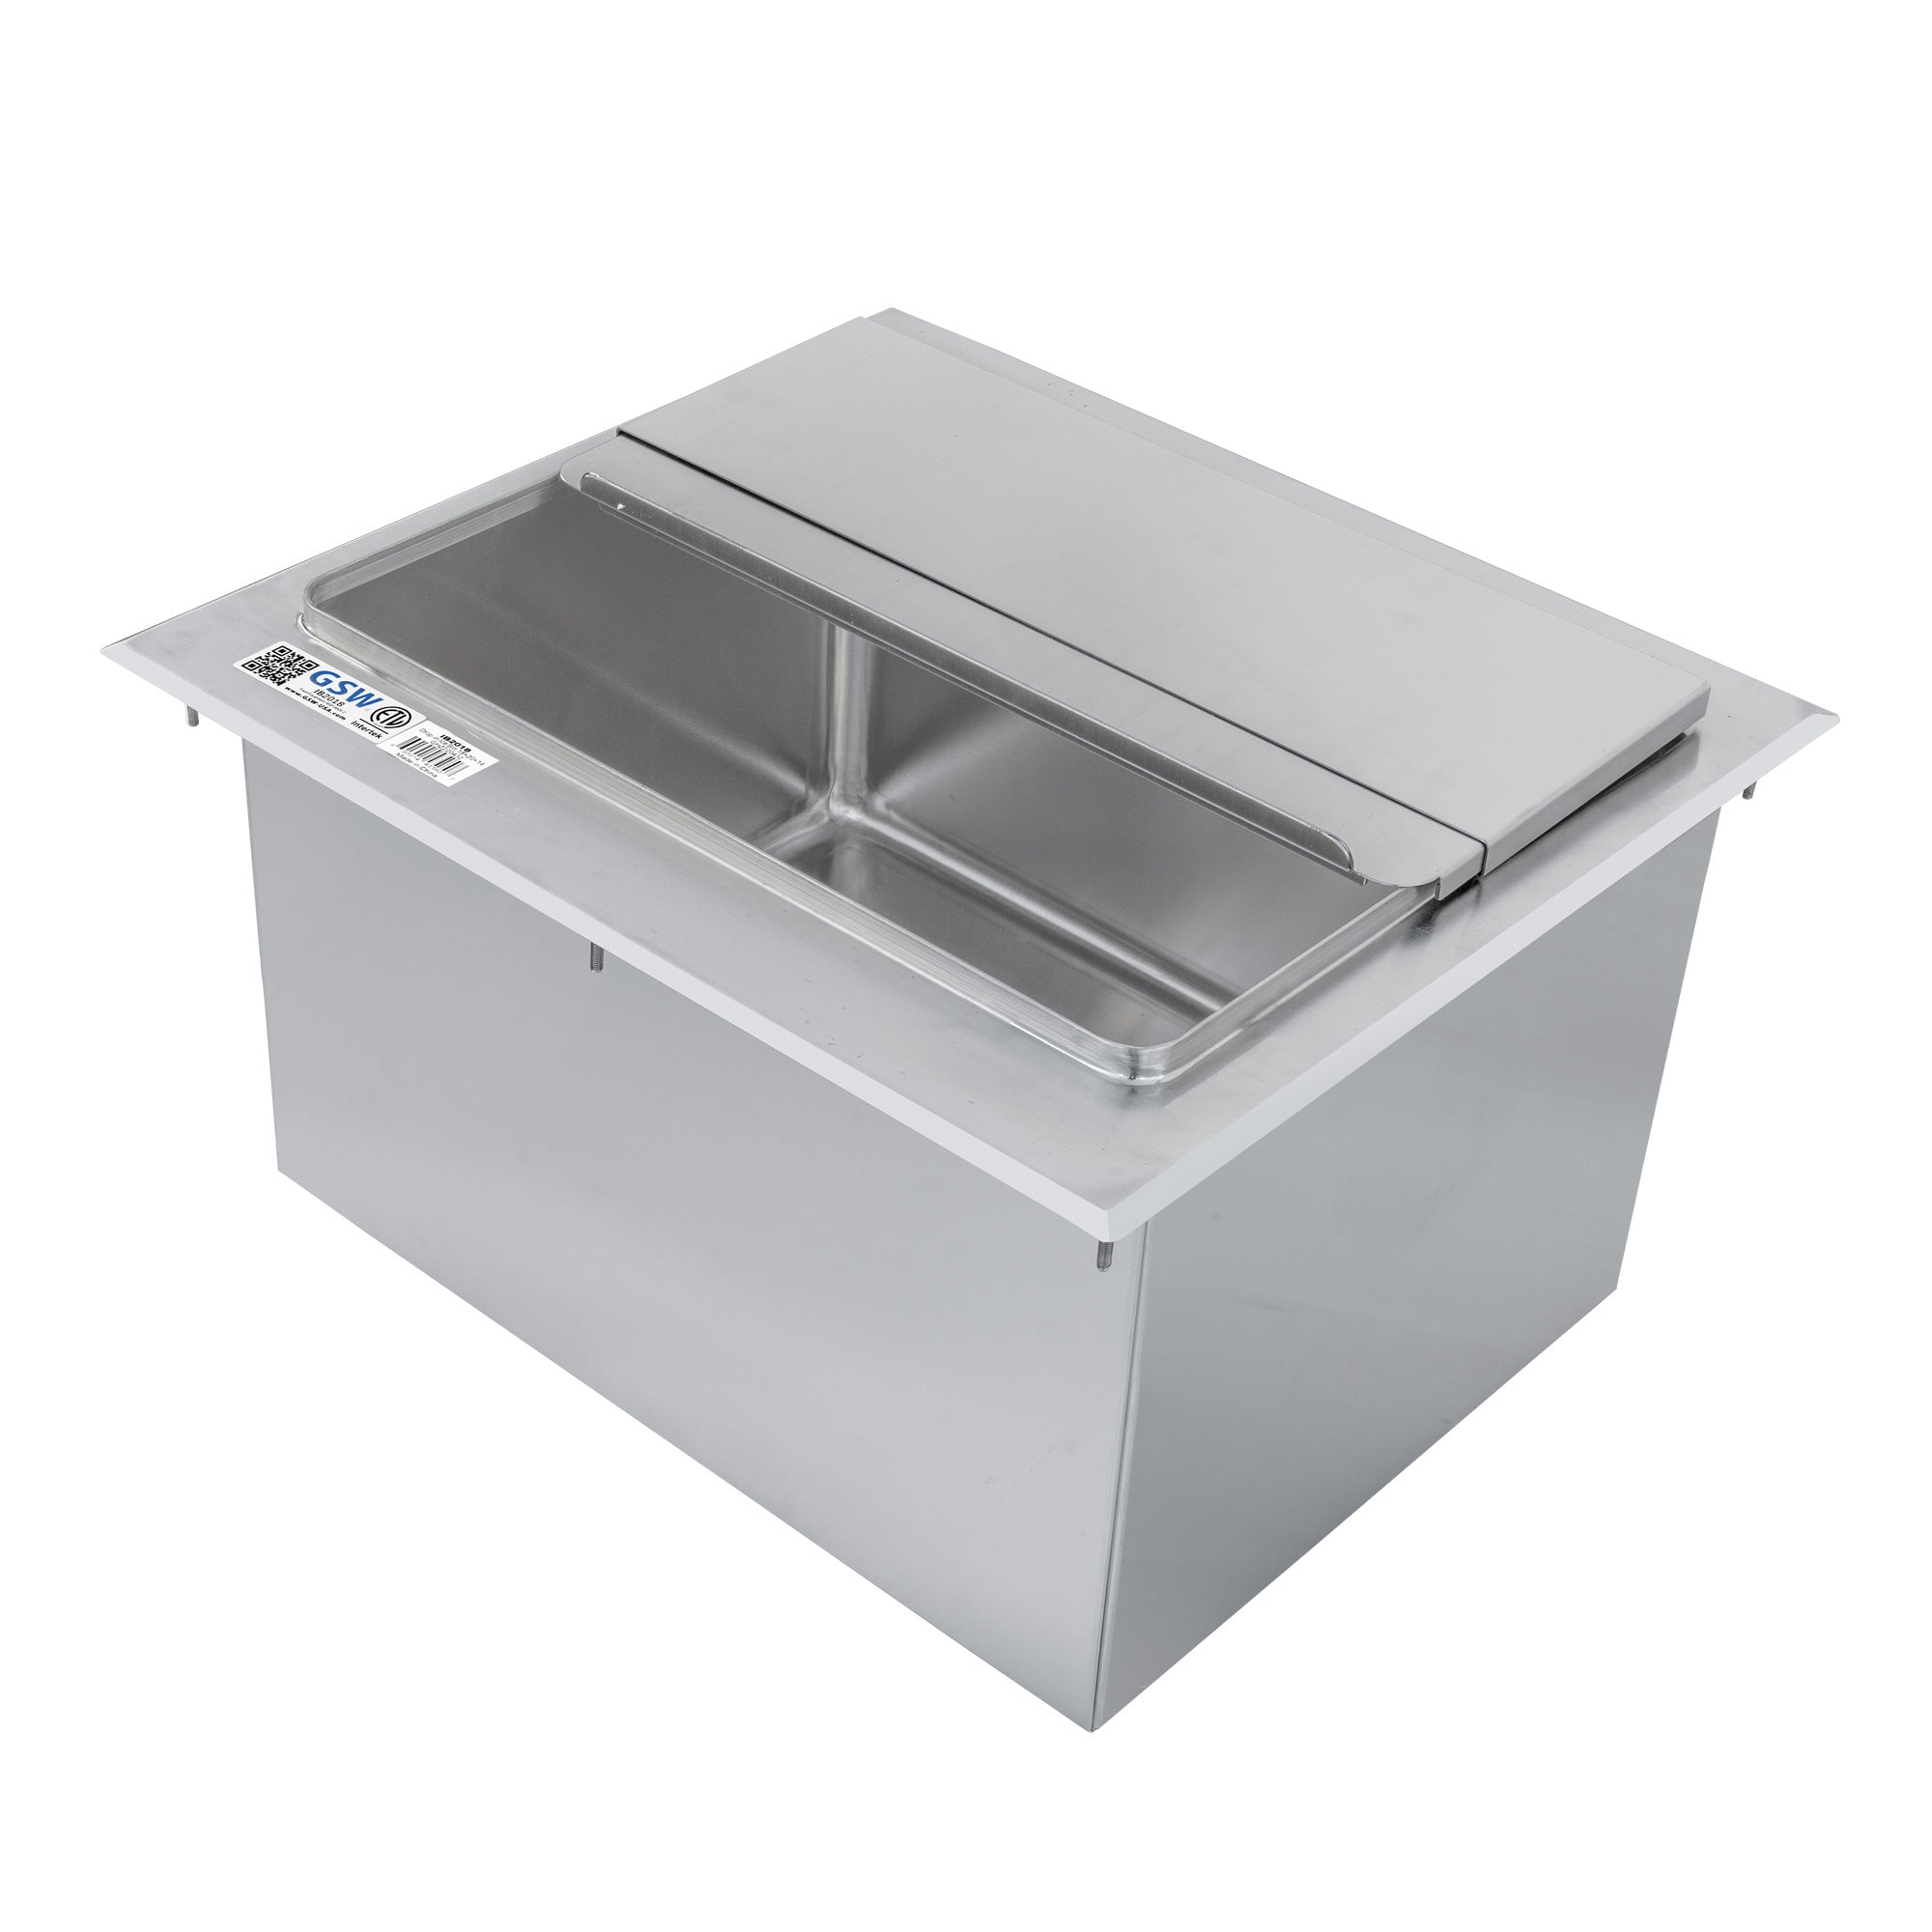 GSW IB2018 Stainless Steel Drop-In Ice Bin 18”D x 20”W x 14”H with Removable Sliding Cover, 9” x 14” Double Walled Ice Bin with 1” NPT Drain, for Storing Ice Cold Wine Beer